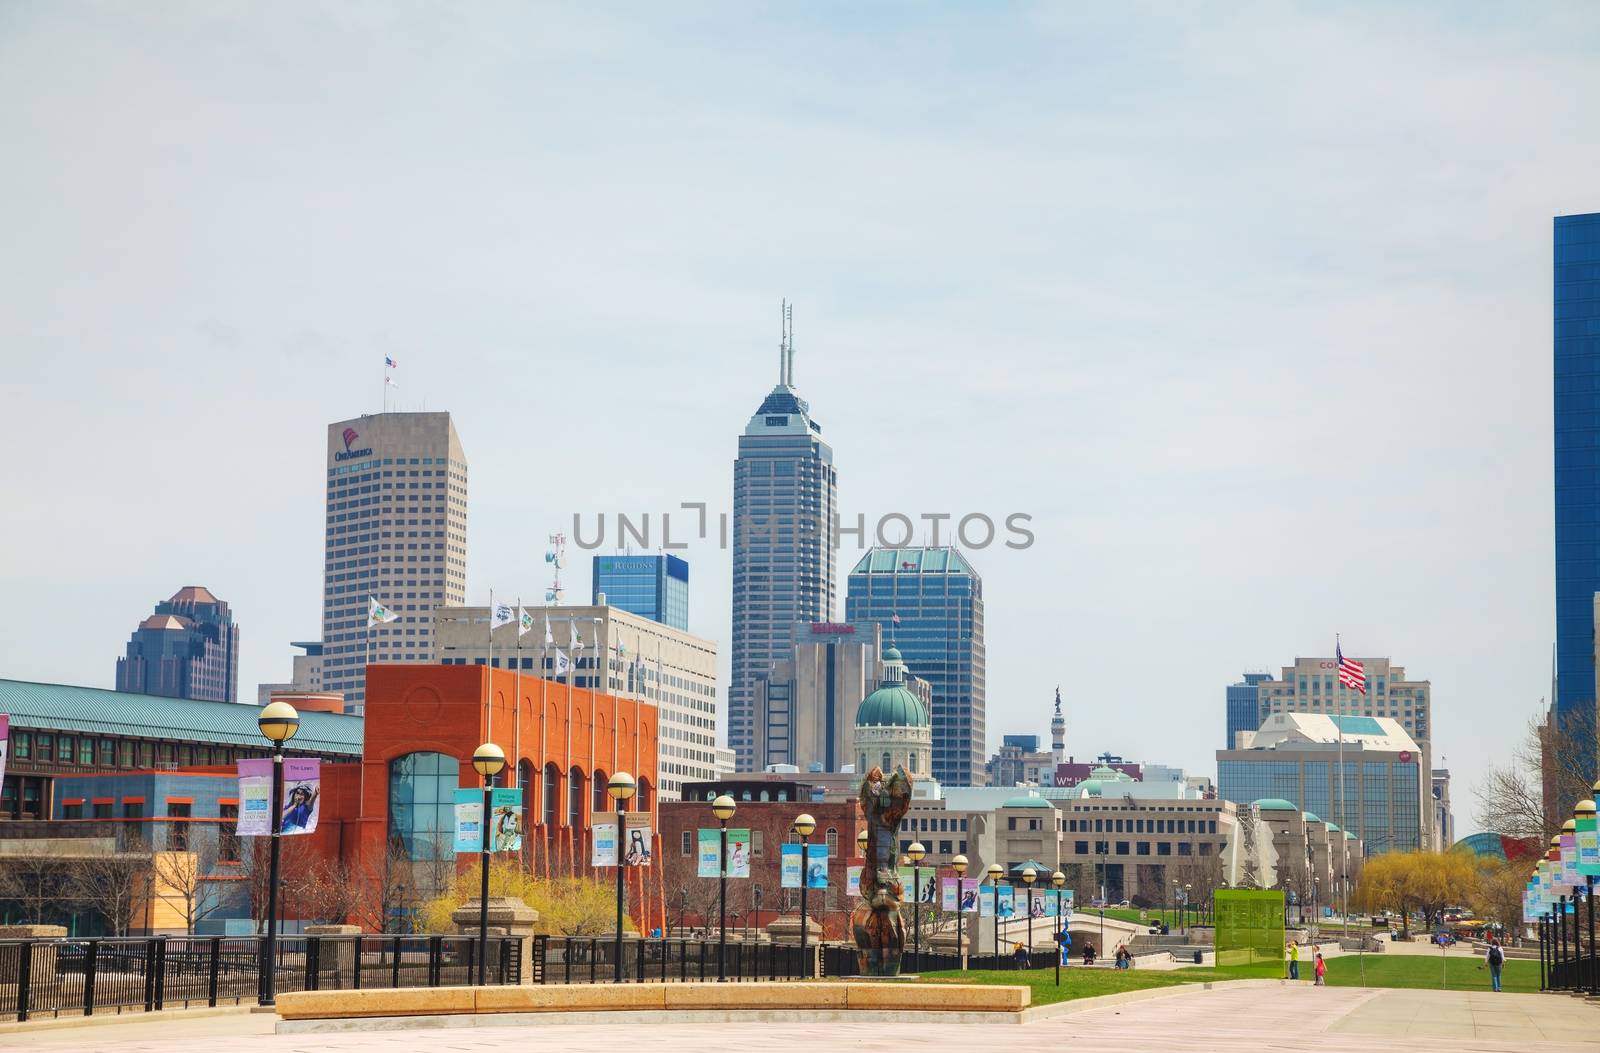 INDIANAPOLIS - APRIL 11: Downtown overview on April 11, 2014 in Indianapolis, Indiana. It's the capital and most populous city of the U.S. state of Indiana, and also the county seat of Marion County.